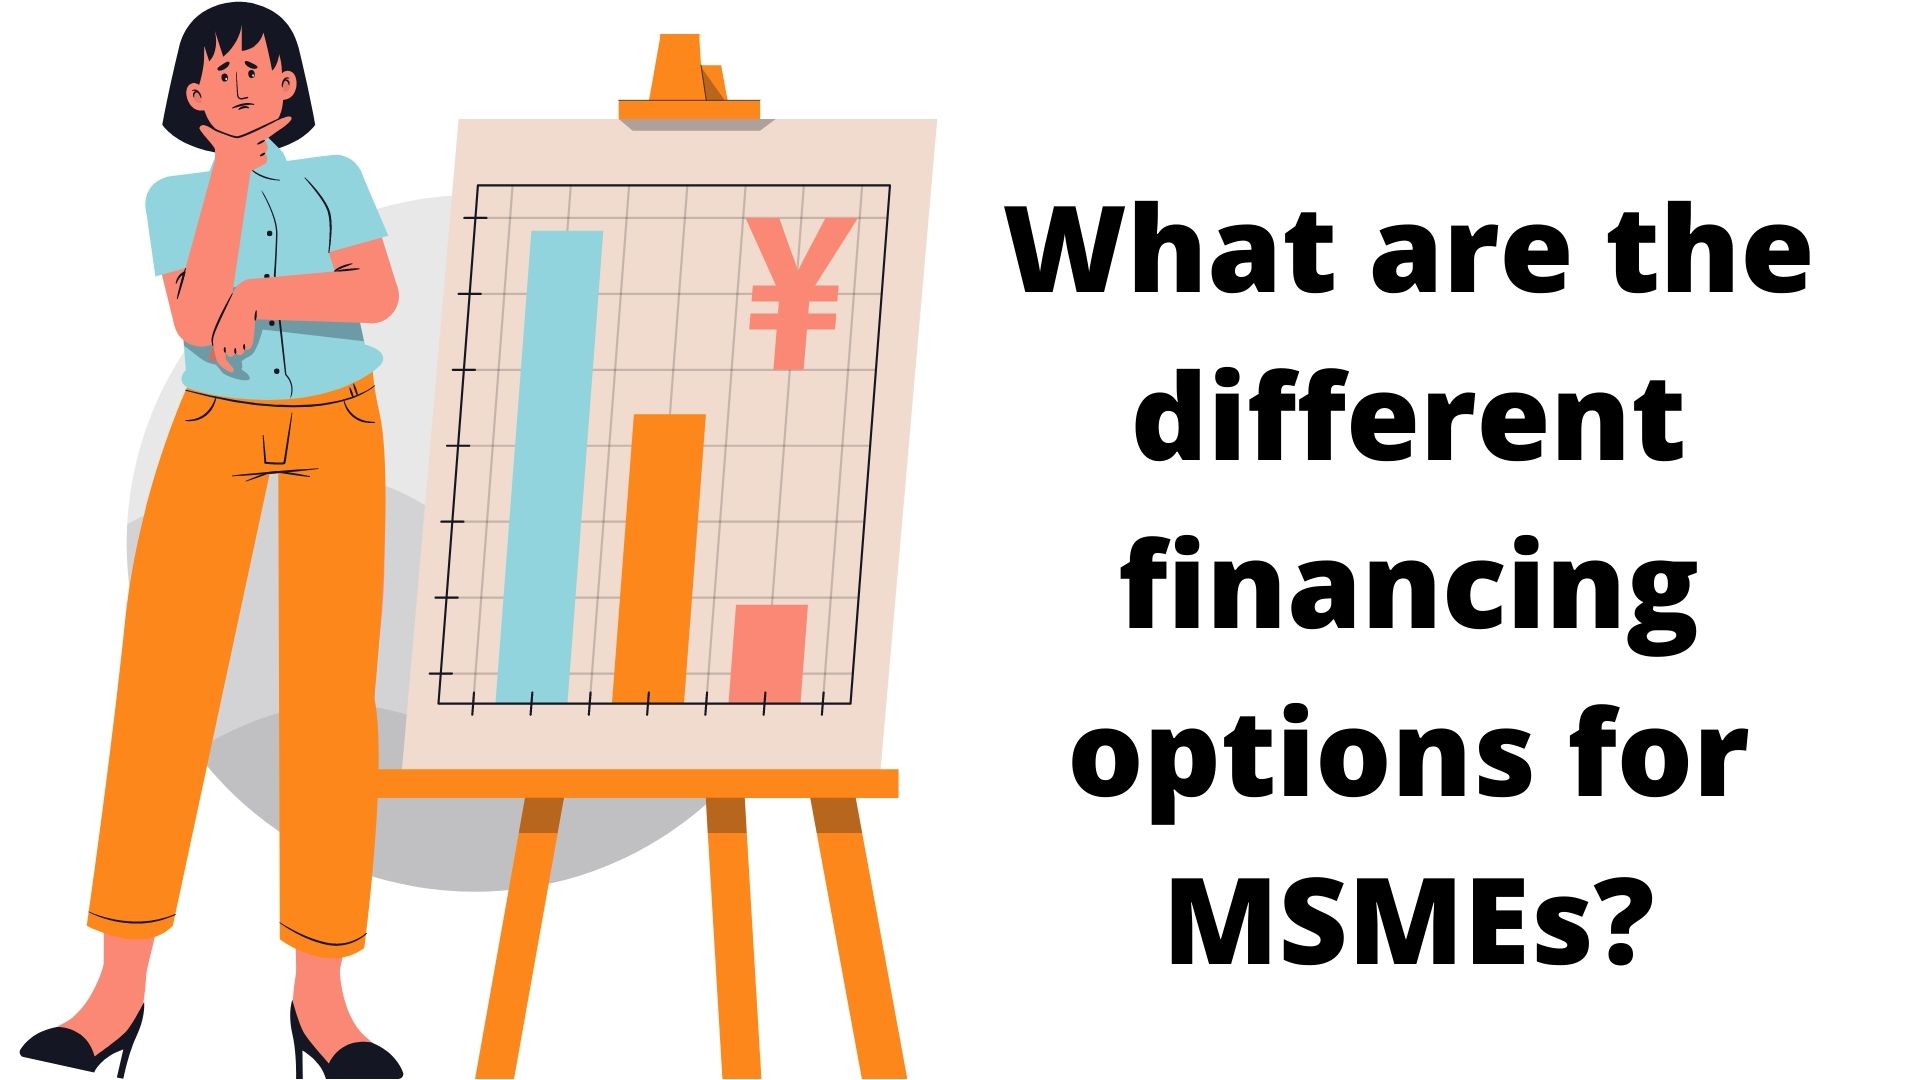 What are the different financing options for MSMEs